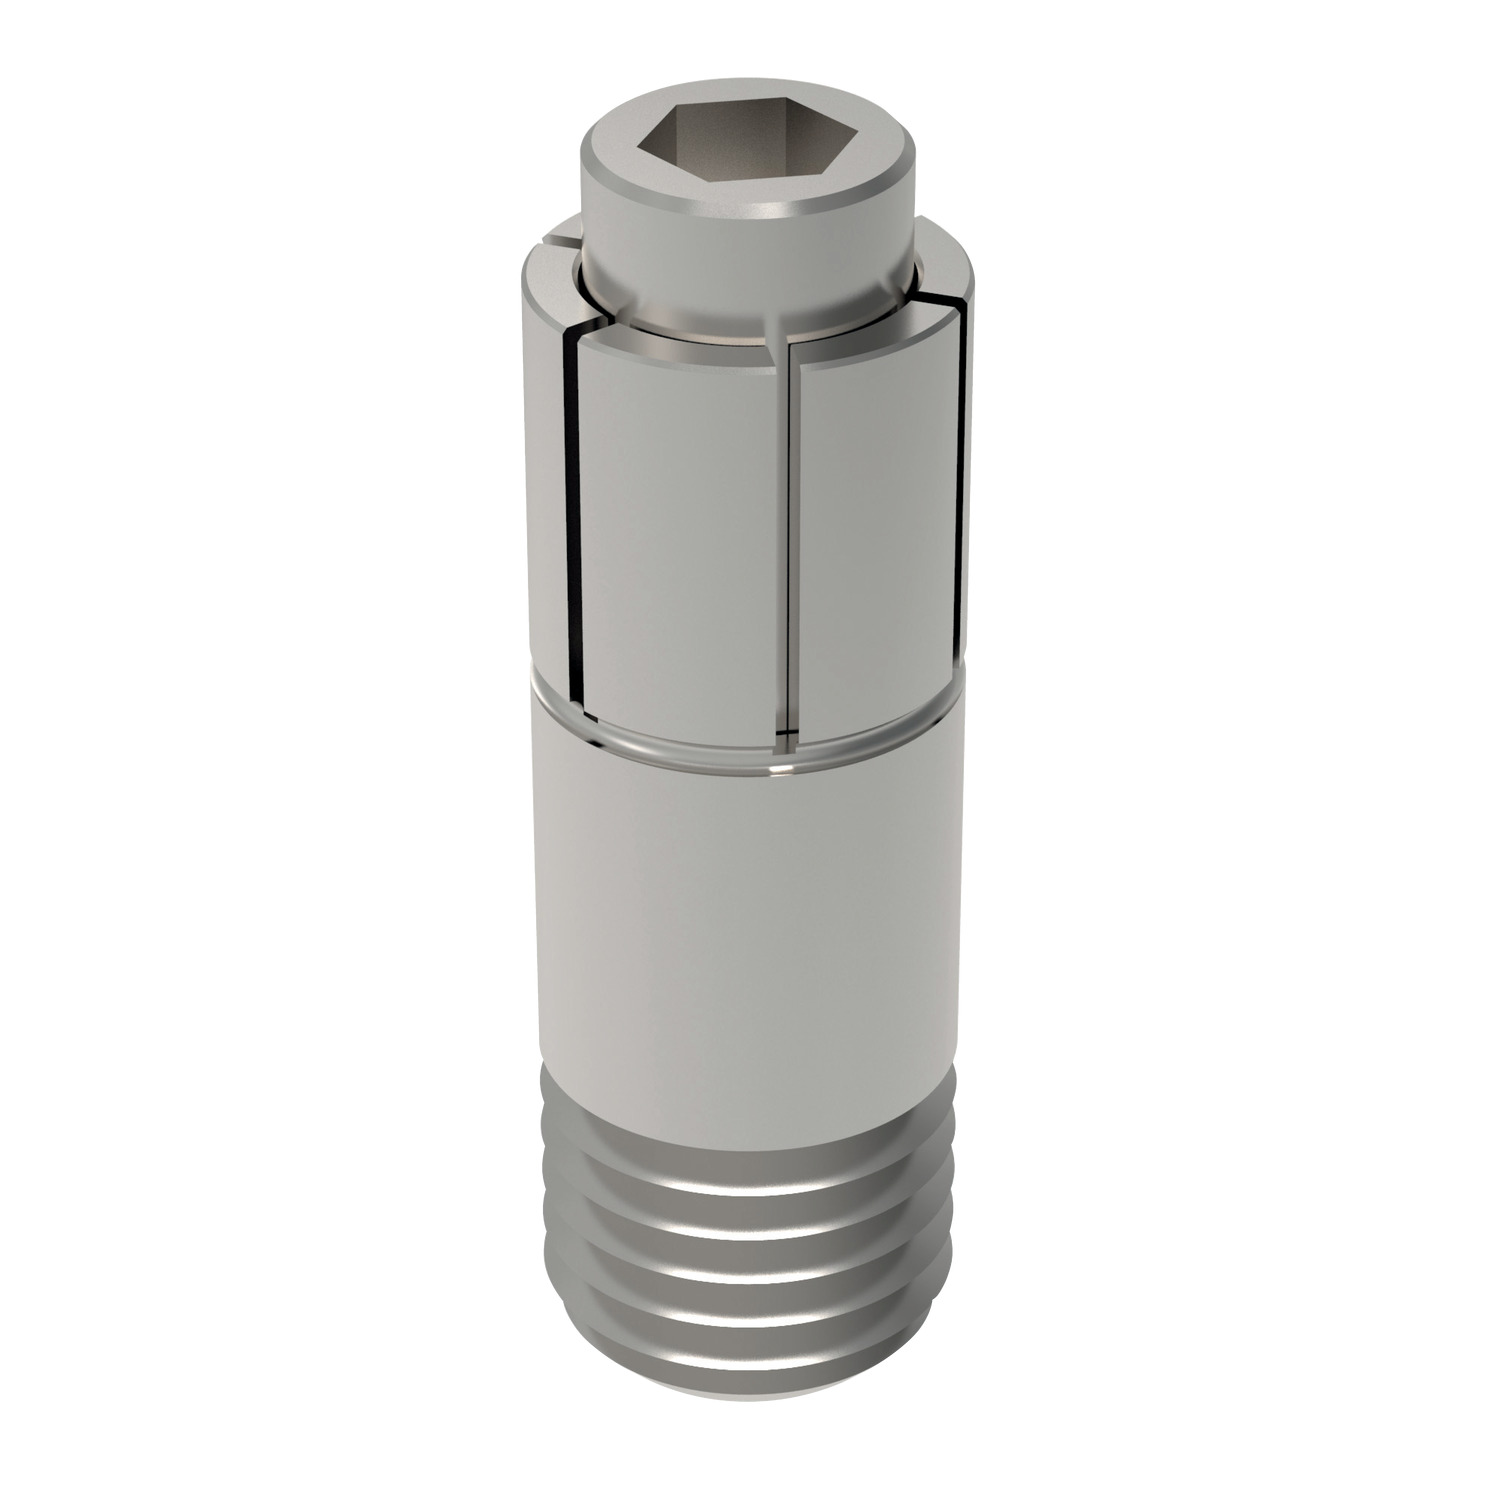 Product 12059, XYZ Xpansion Pins threaded installation / 